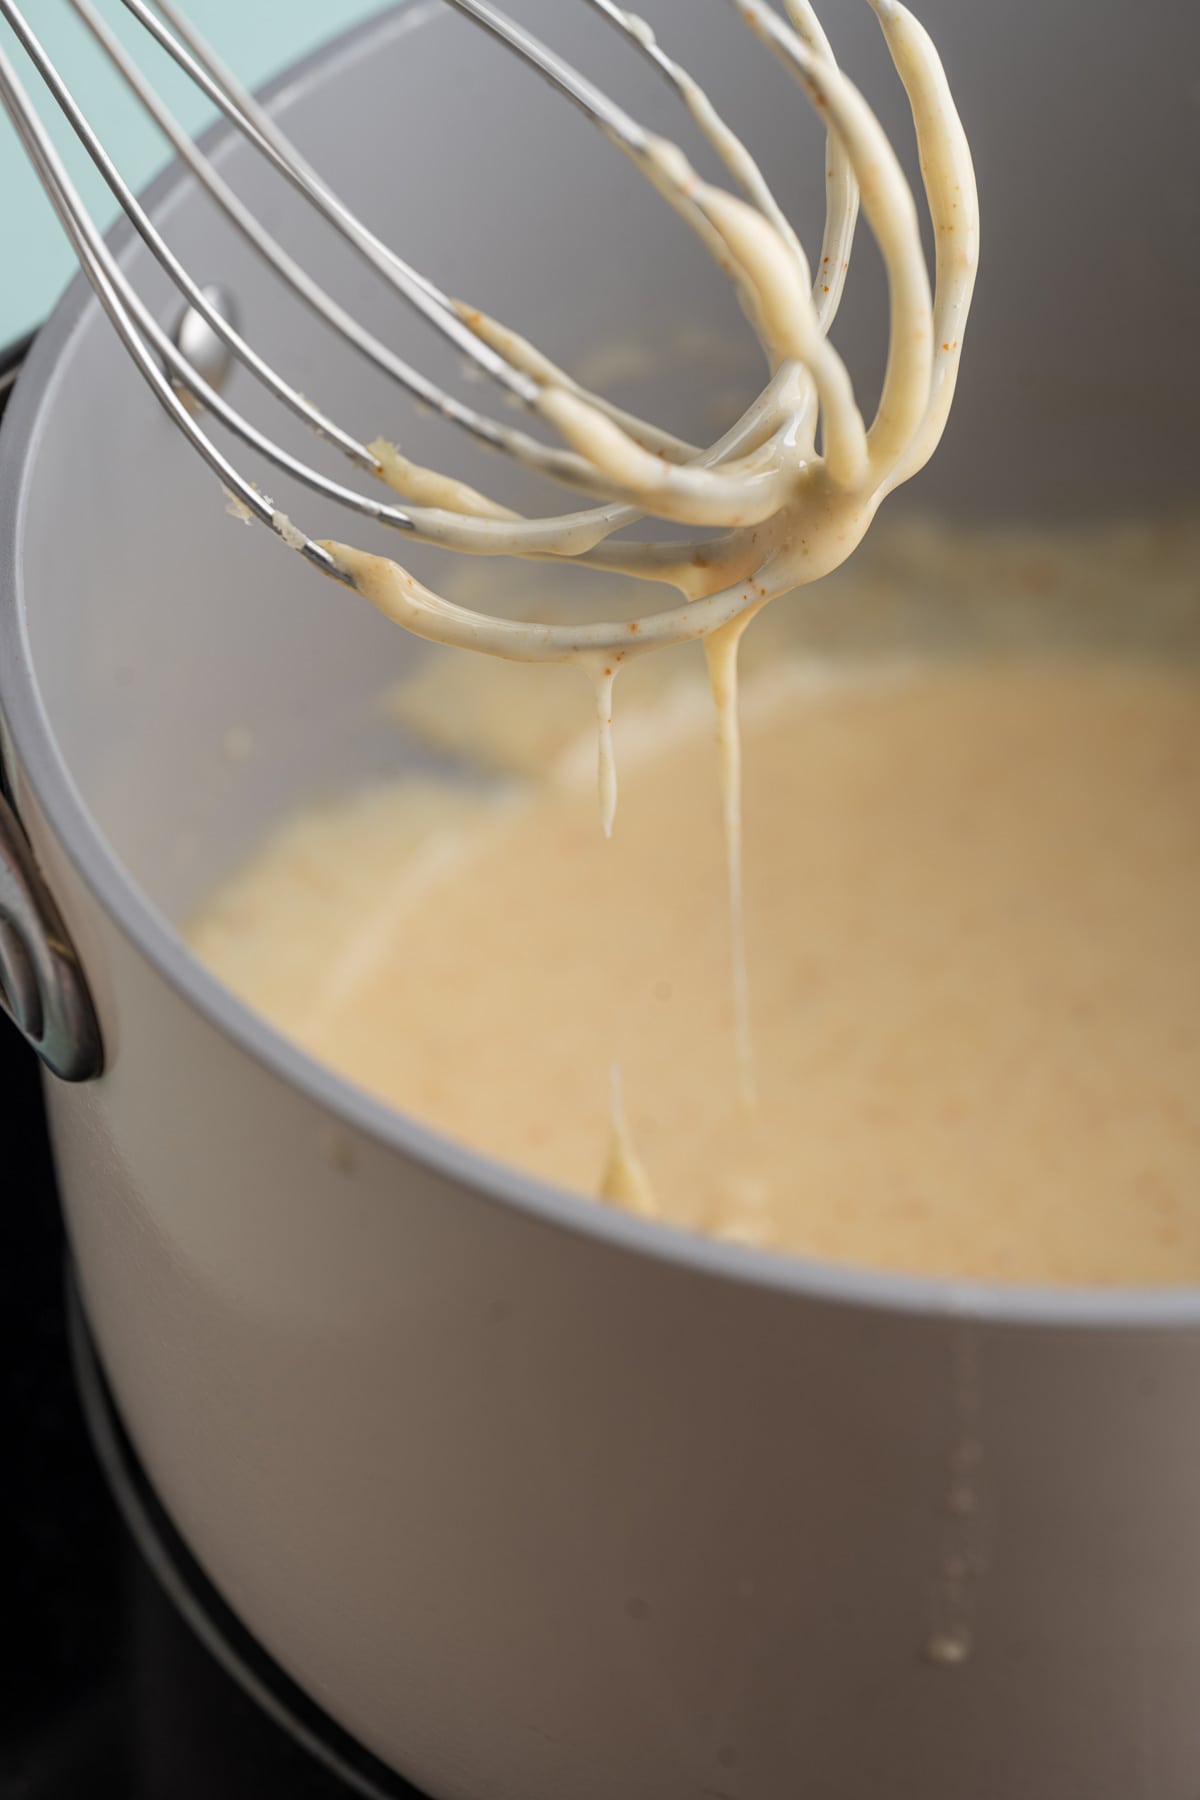 Tex-Mex Queso Blanco dripping off a whisk